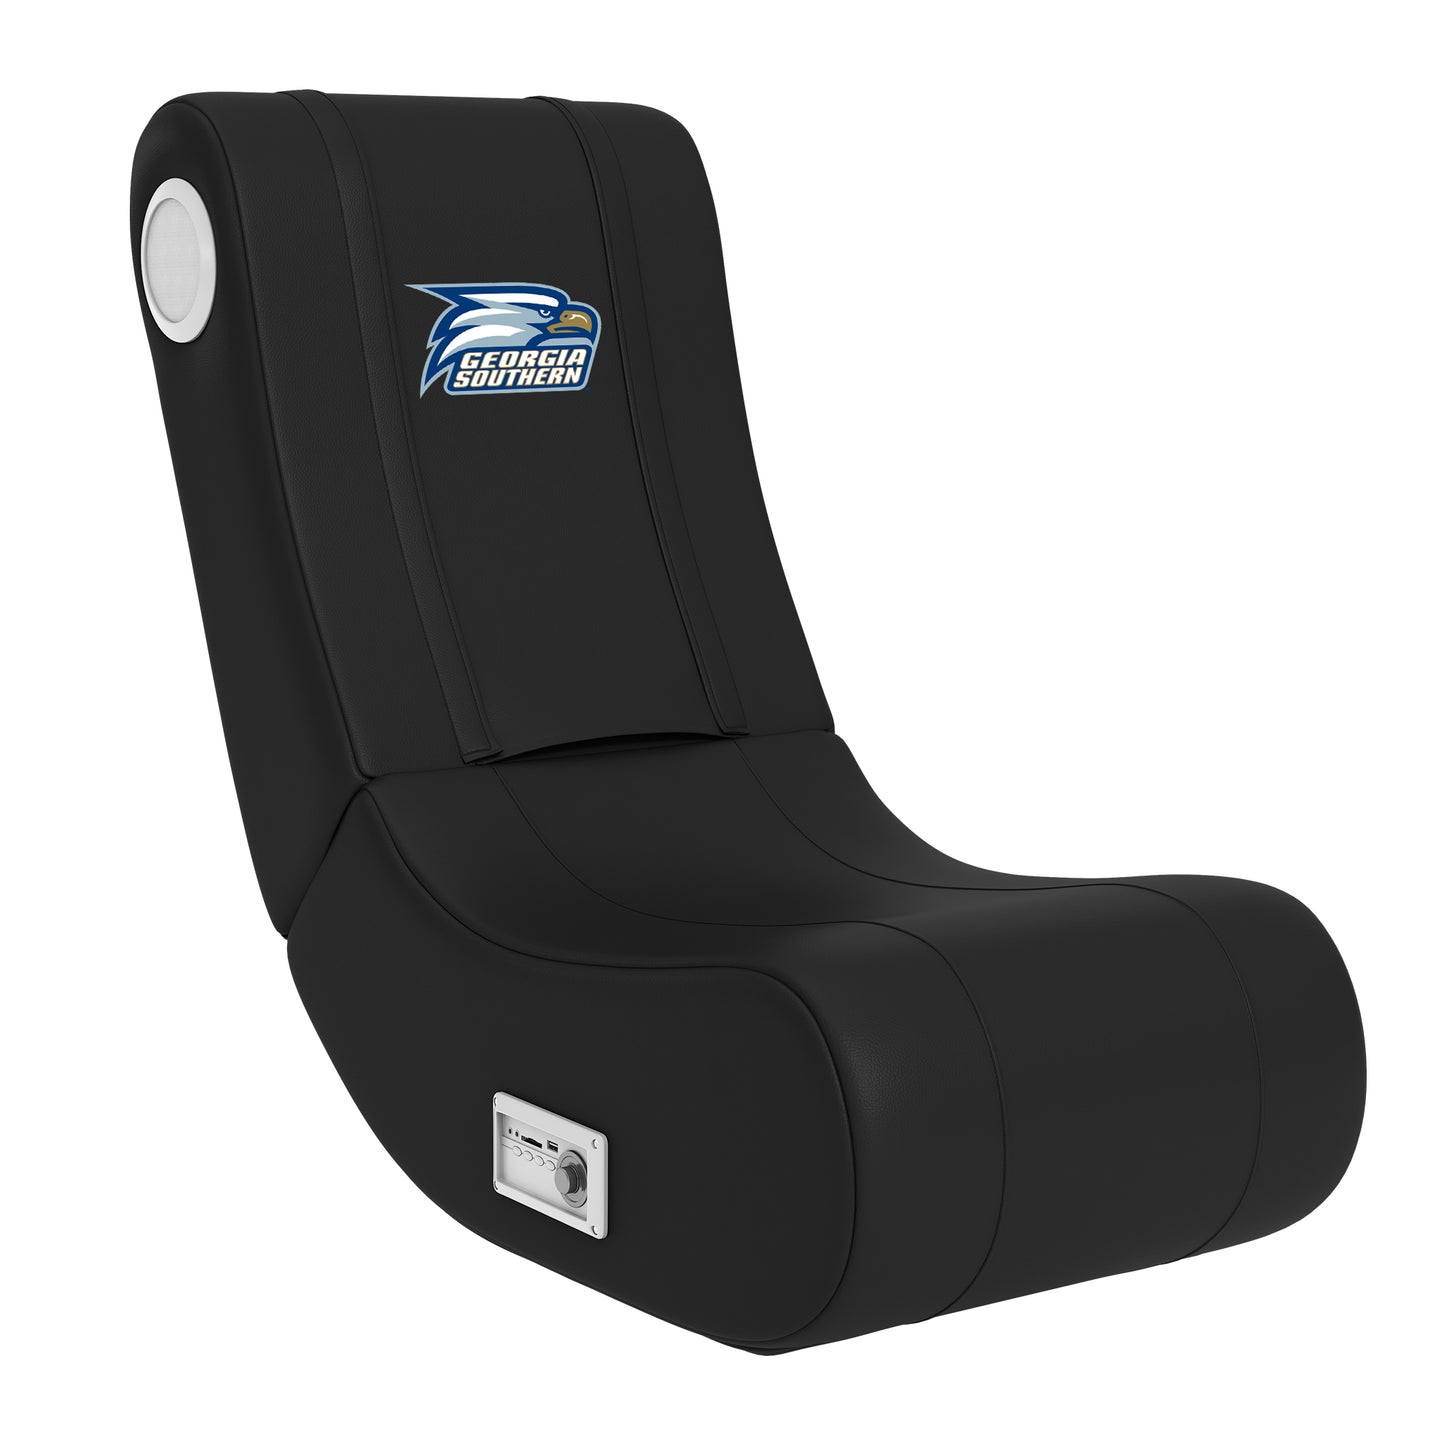 Game Rocker 100 with Georgia Southern University with Eagles Logo